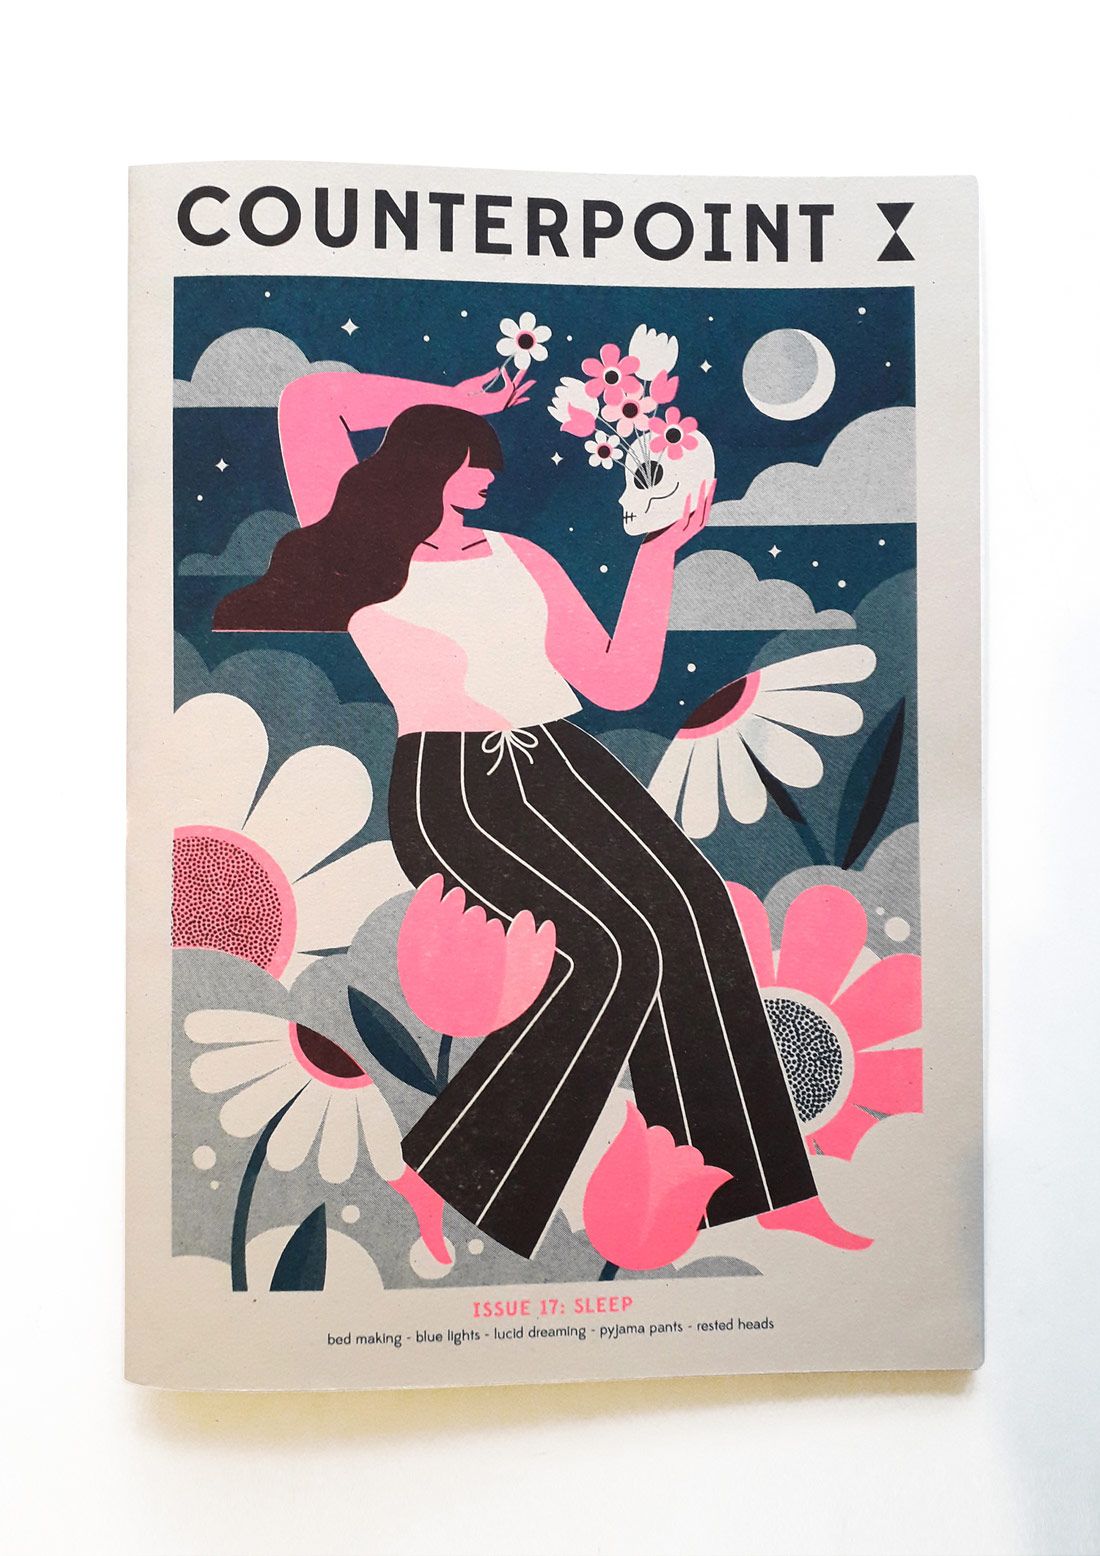 Cover illustration for Counterpoint magazine - Sleep Issue